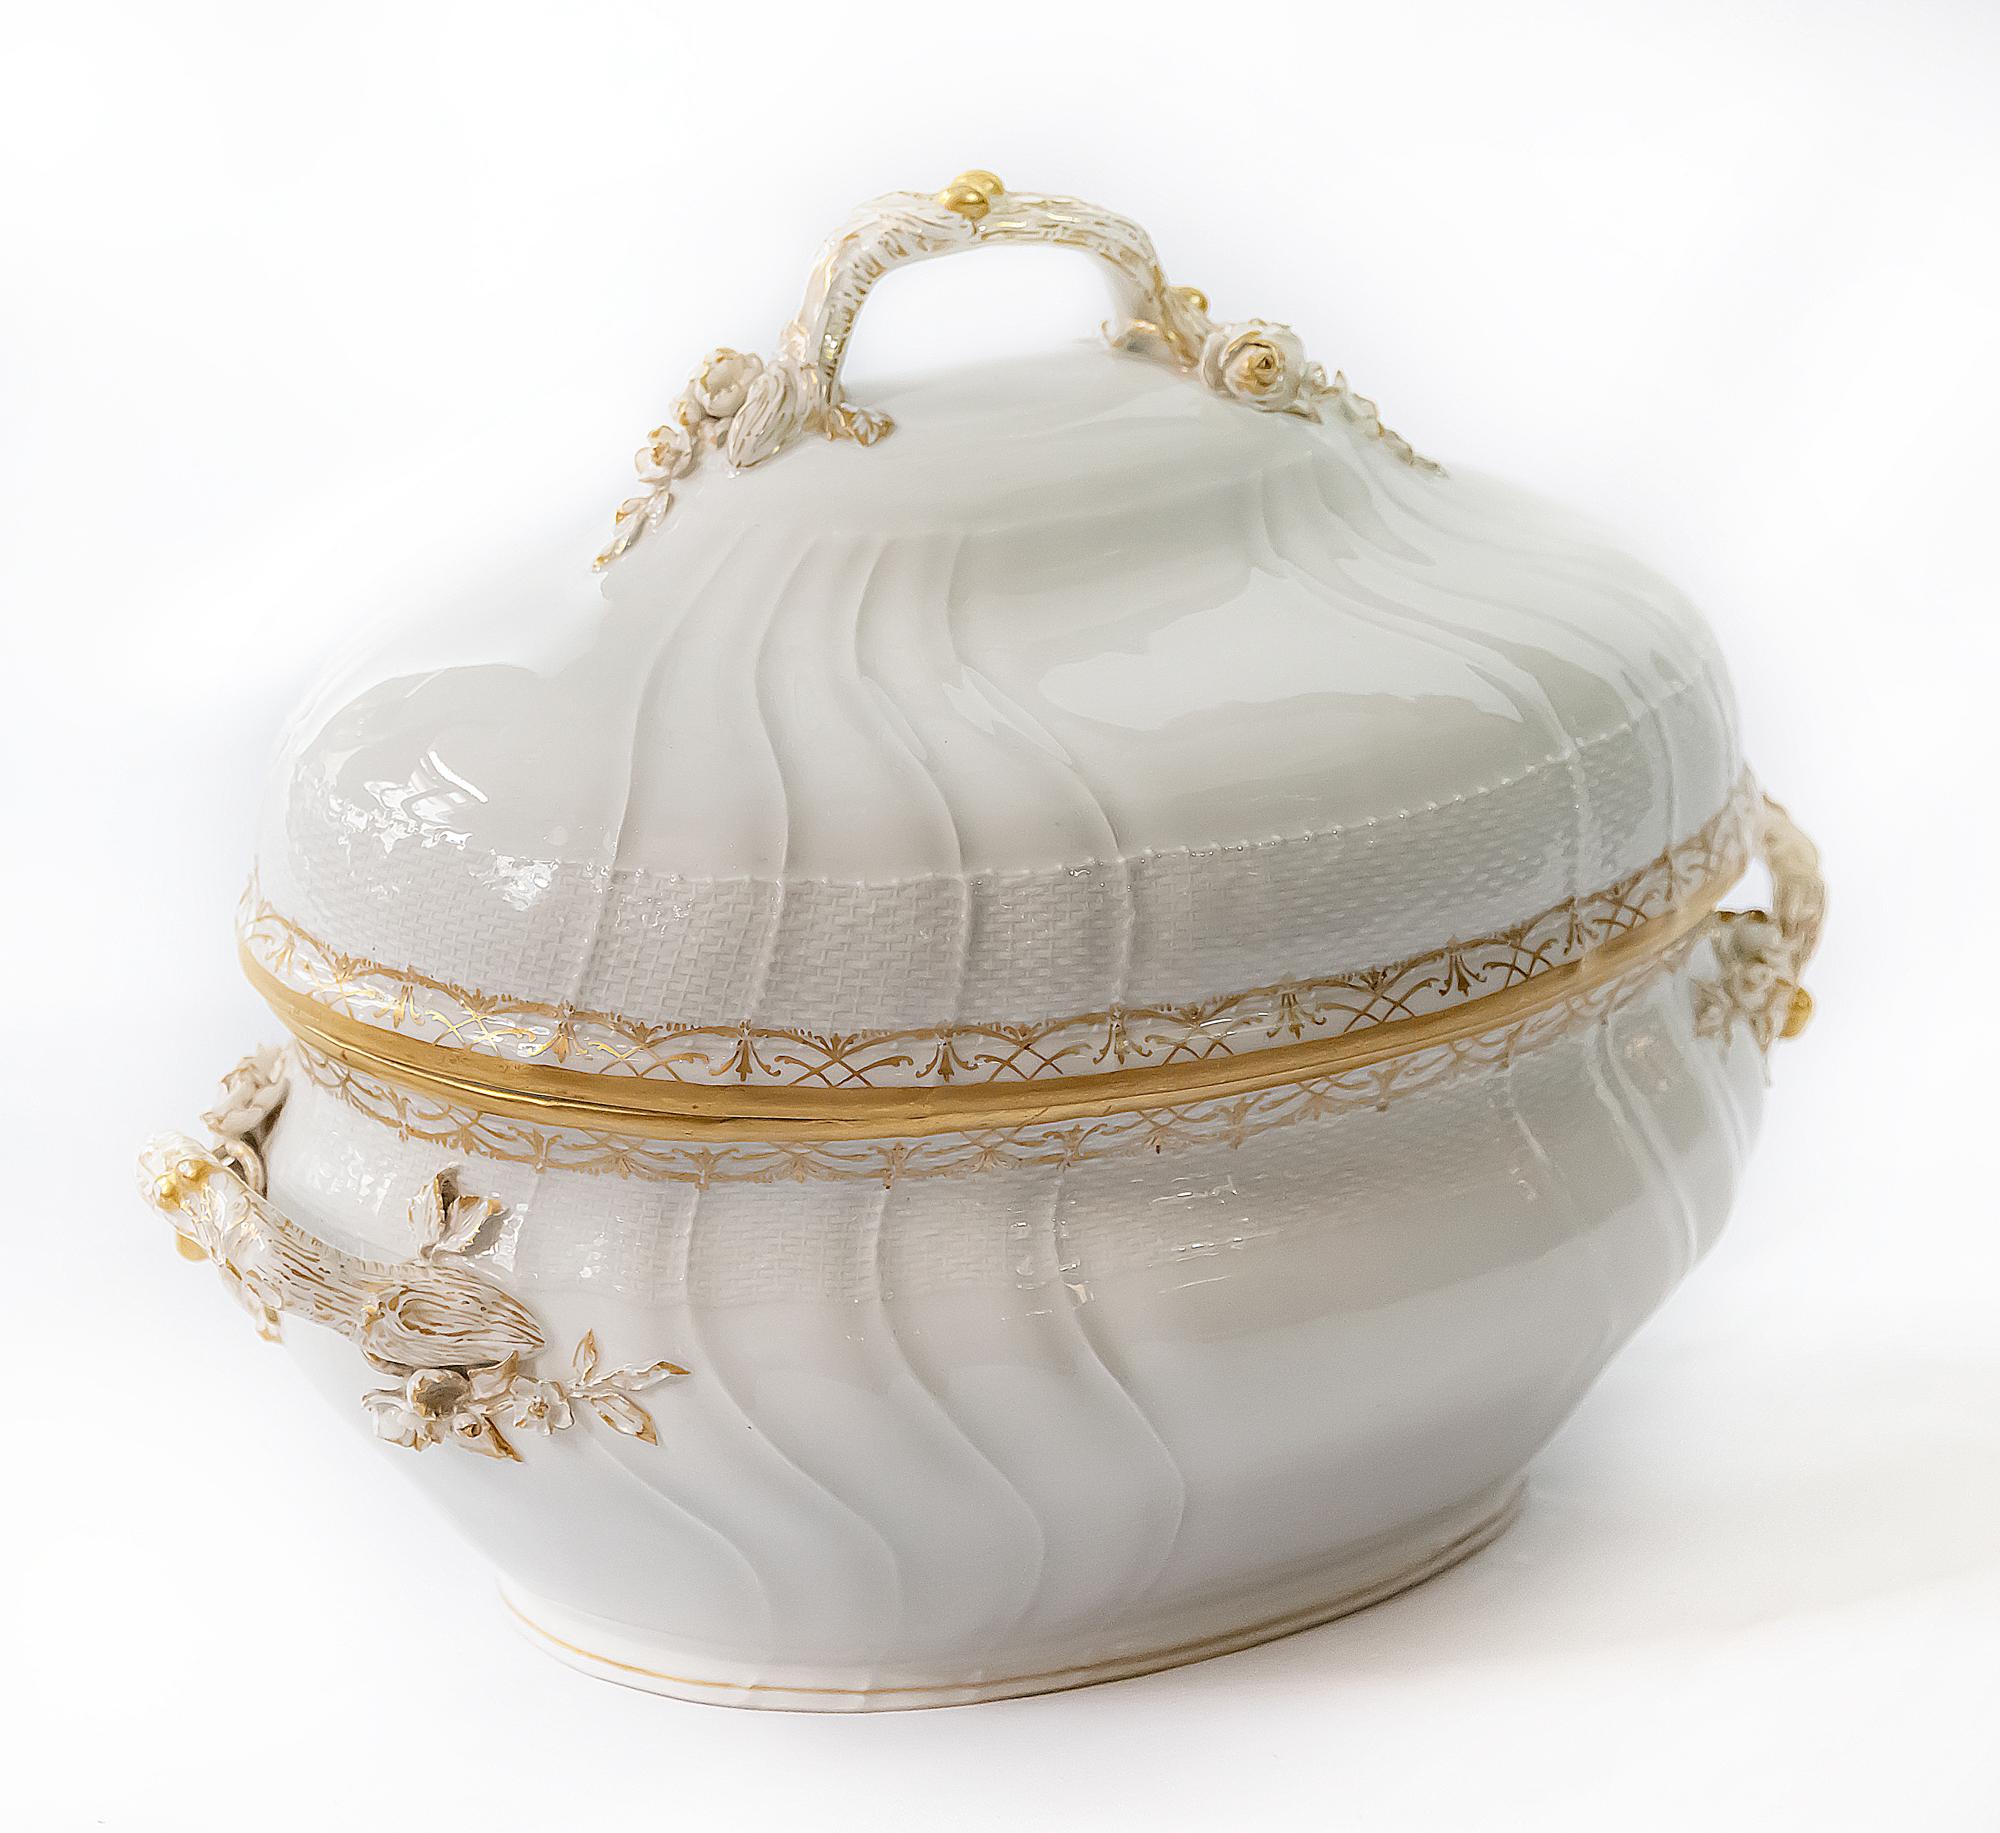 Antique KPM oval porcelain soup tureen is handmade with glazed relief ornament surface.
It is hand painted with gold and decorated with molded flowers bouqets on the handles.
Measurements: 38 x 25x (H)29 cm.